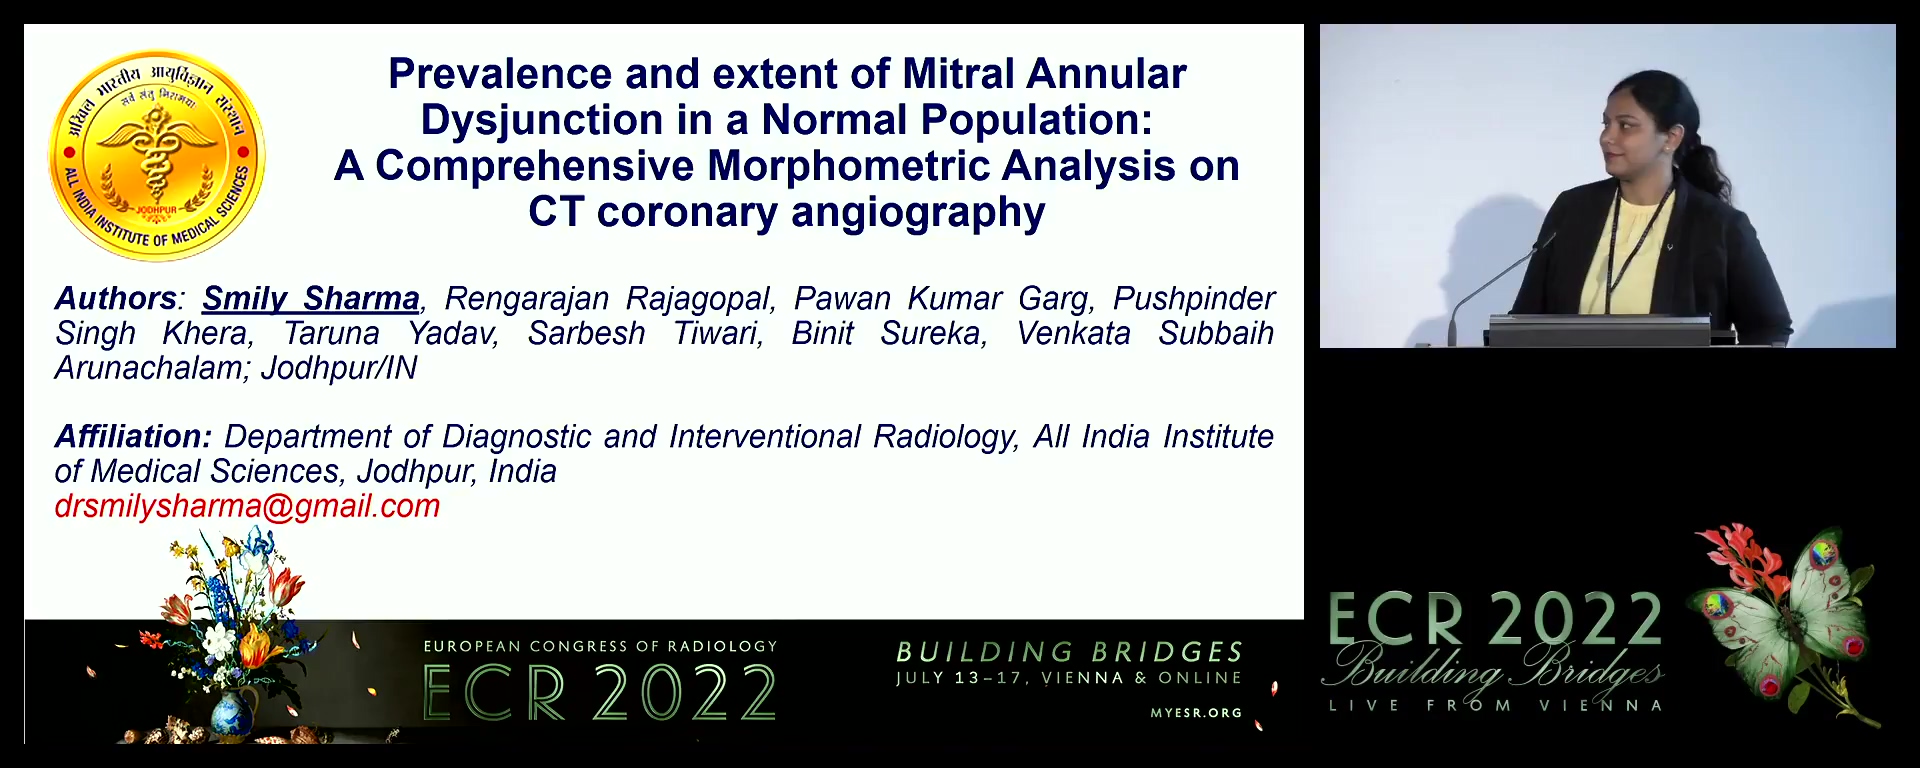 Prevalence and extent of mitral annular dysjunction in a normal population: a comprehensive morphometric analysis on CT coronary angiography - Smily Sharma, Amritsar / IN